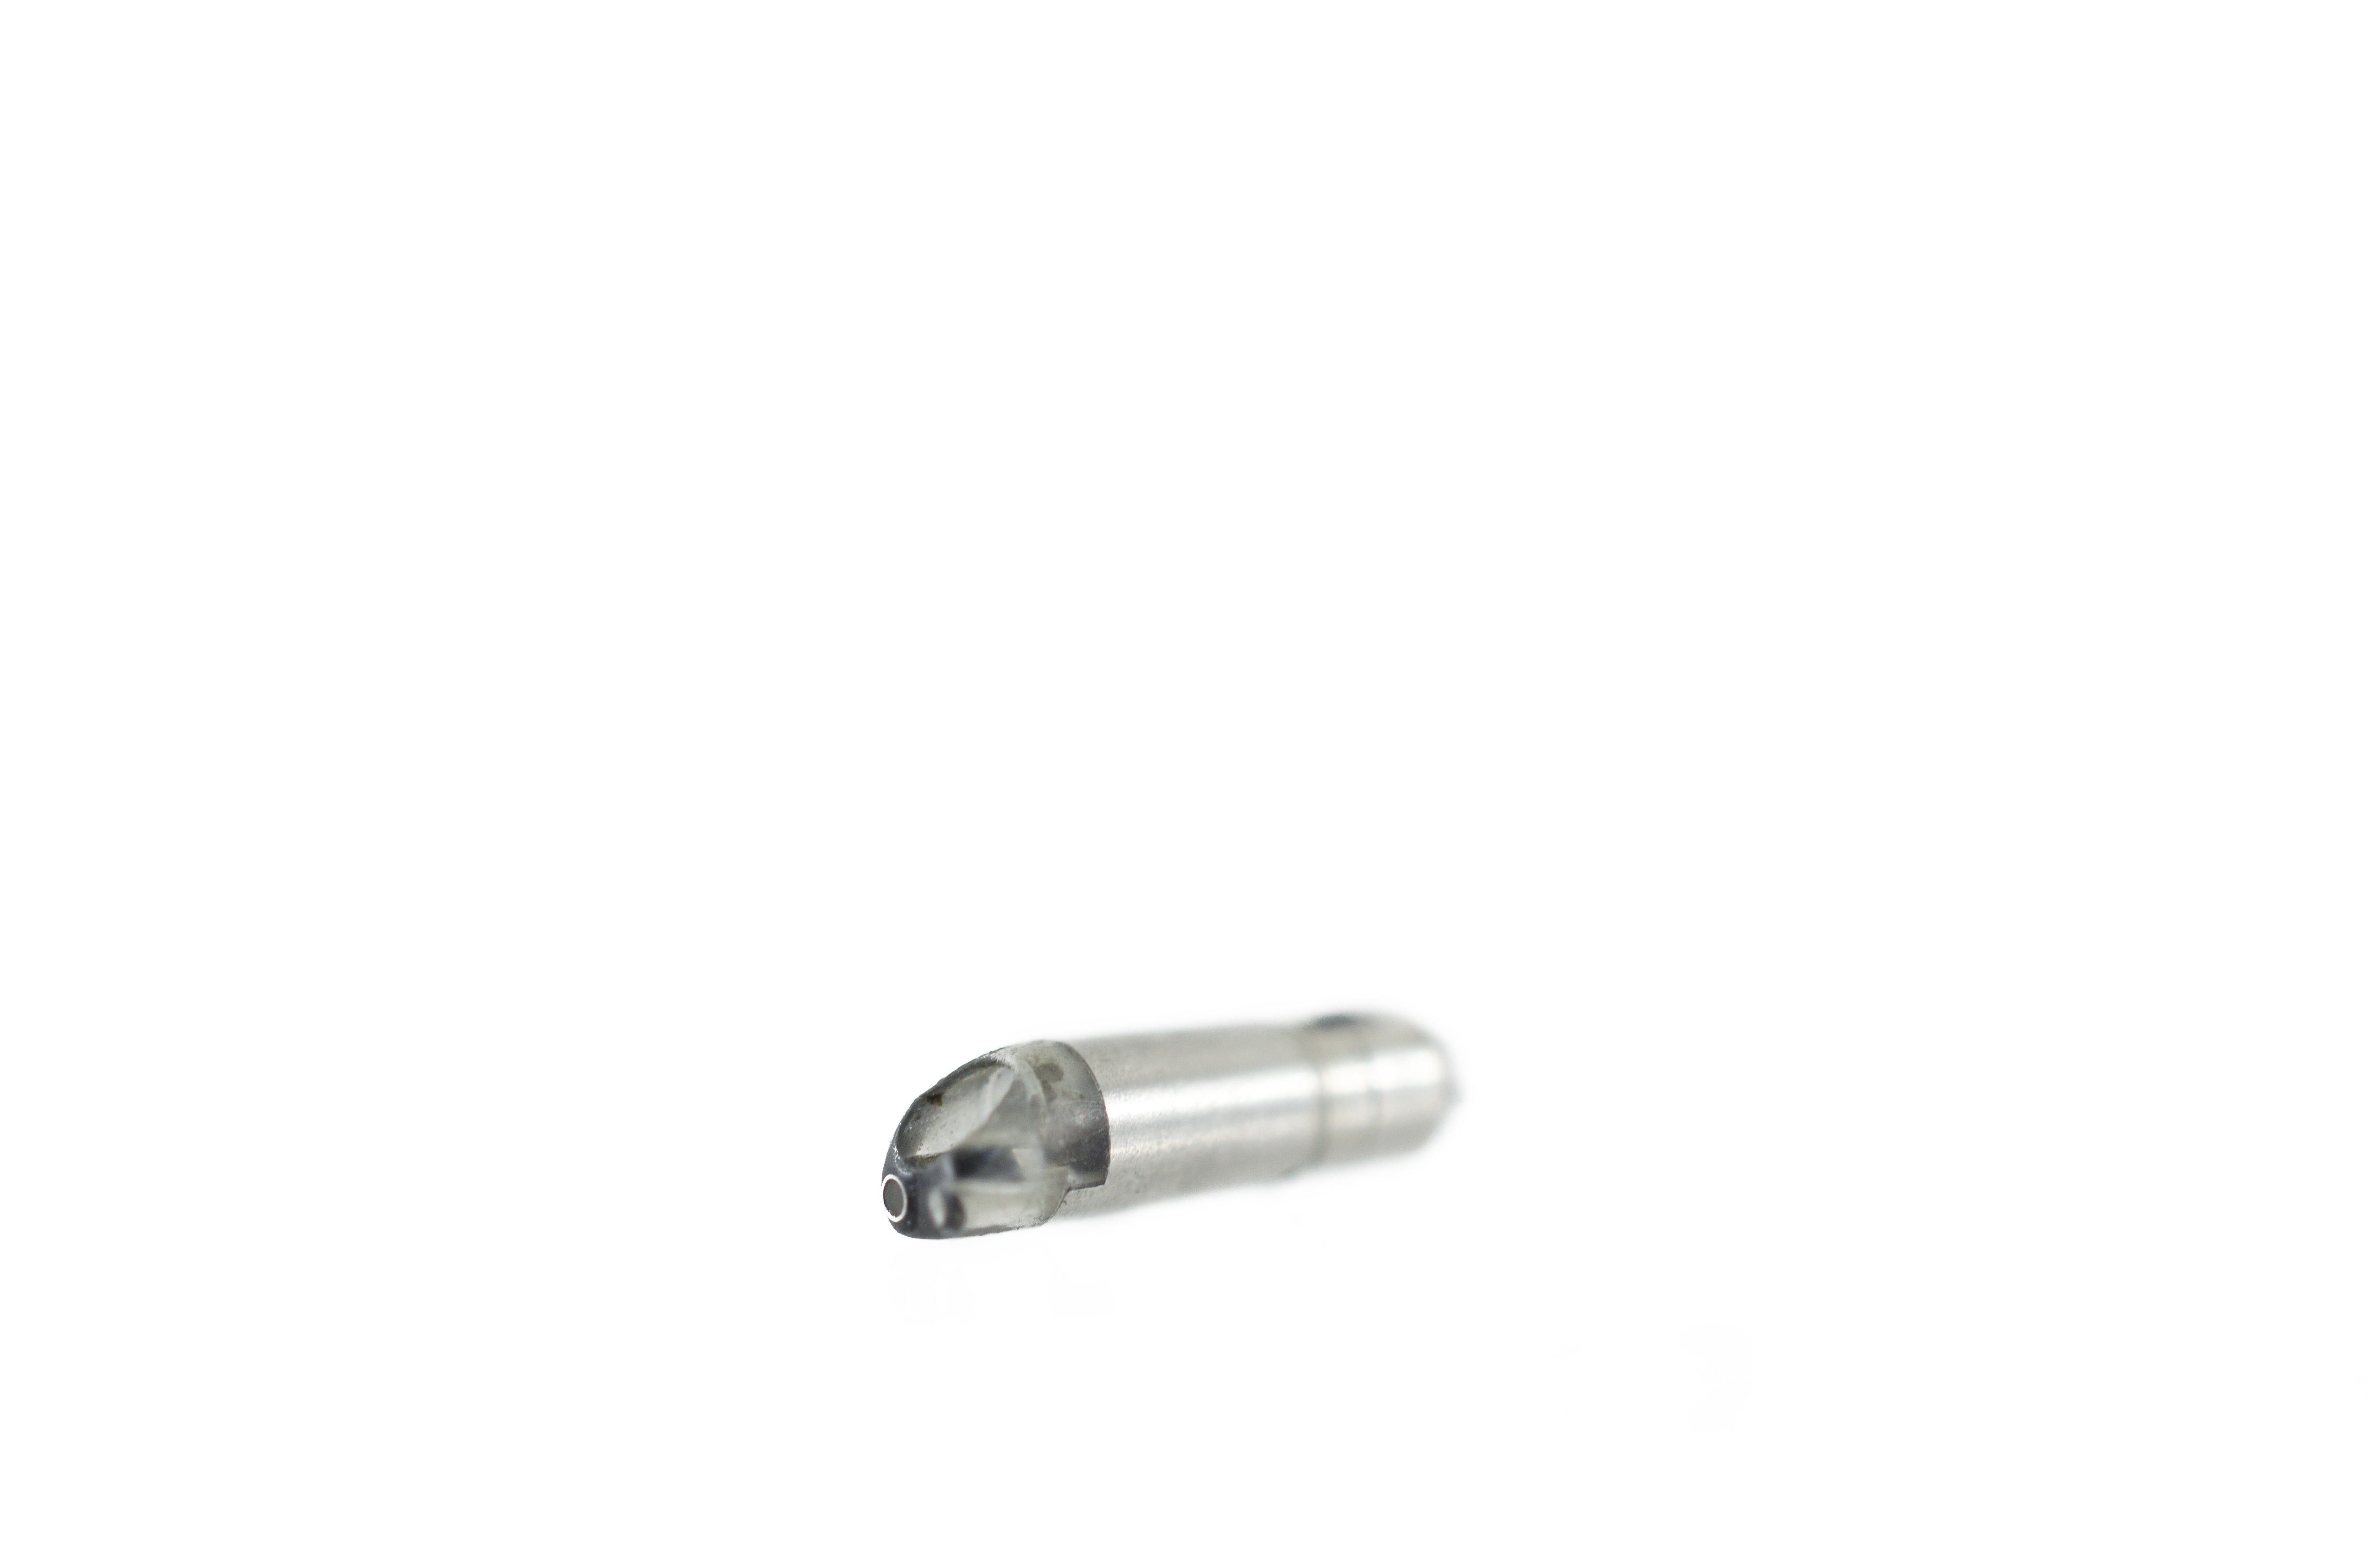 OEM Distal Tip with Lenses, C-Cover, and Objective Stack - URF-P6, URF-P6R